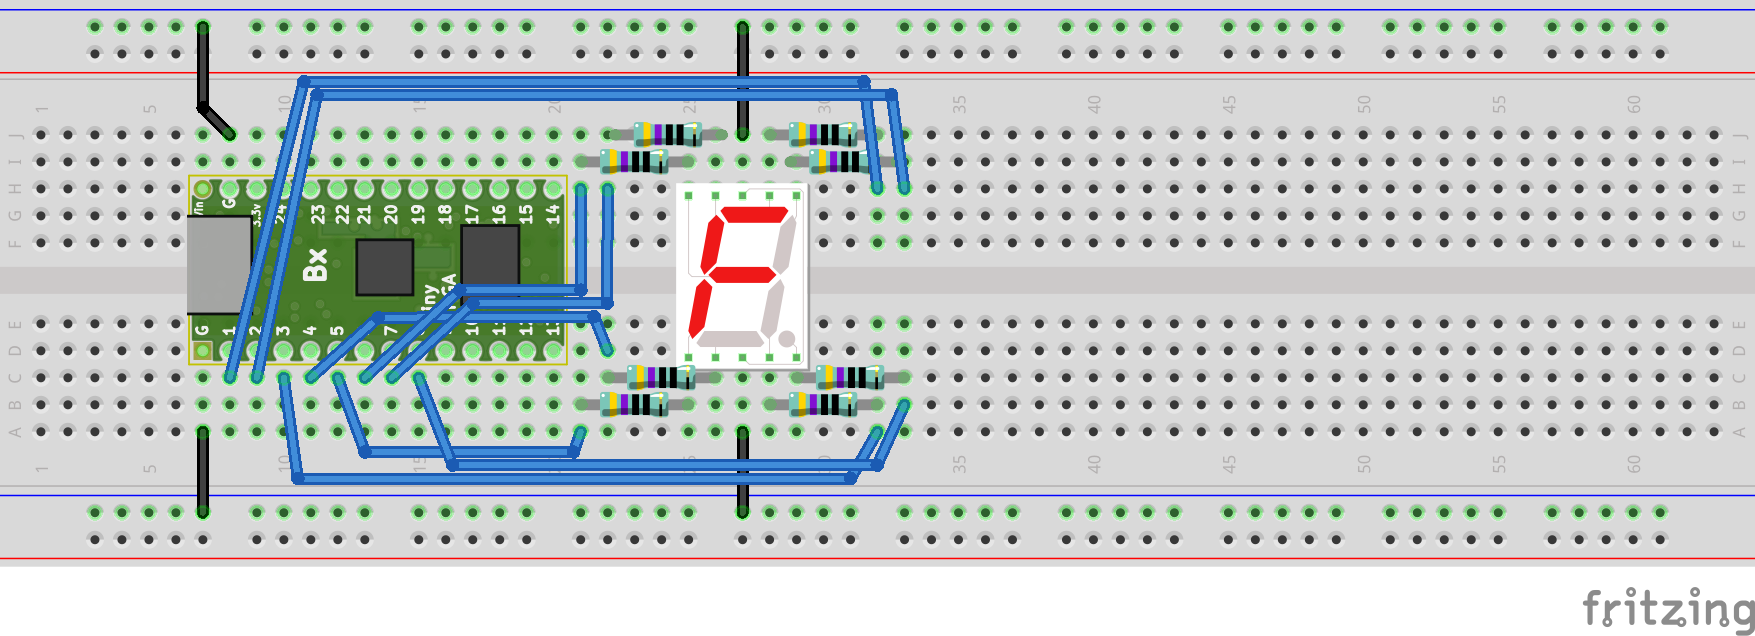 Laying out the parallel seven segment display